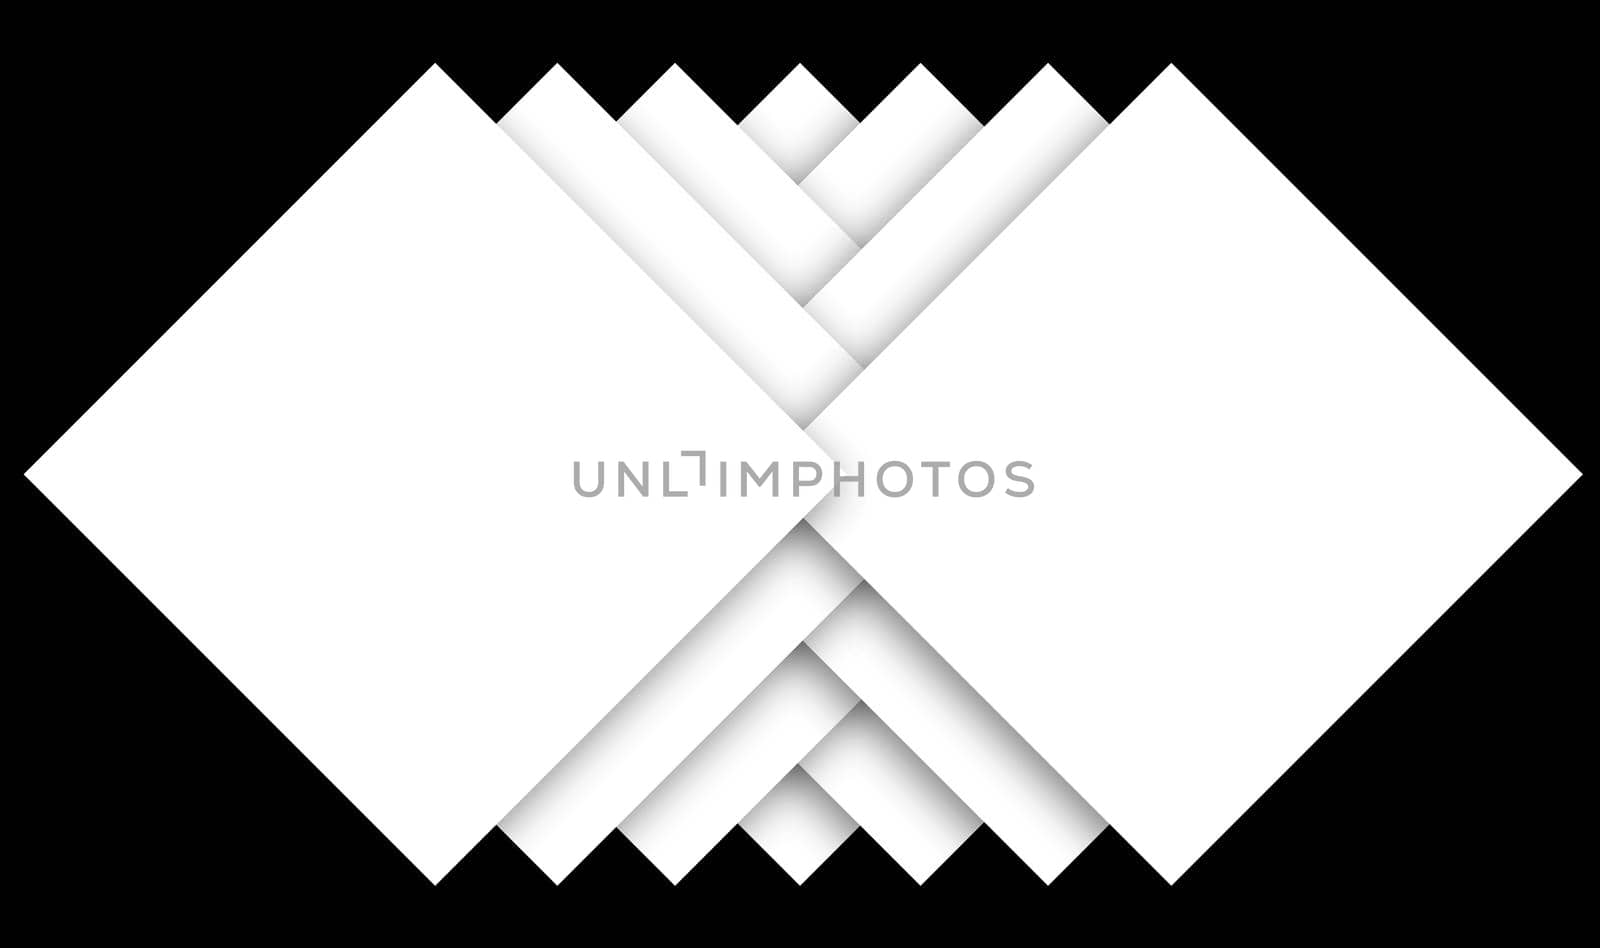 abstract concept design made of squares in center of the image creating design by overlapping on each other in the black isolated background with soft shadow, layered image ready to print for cards, invitation, design print by tabishere